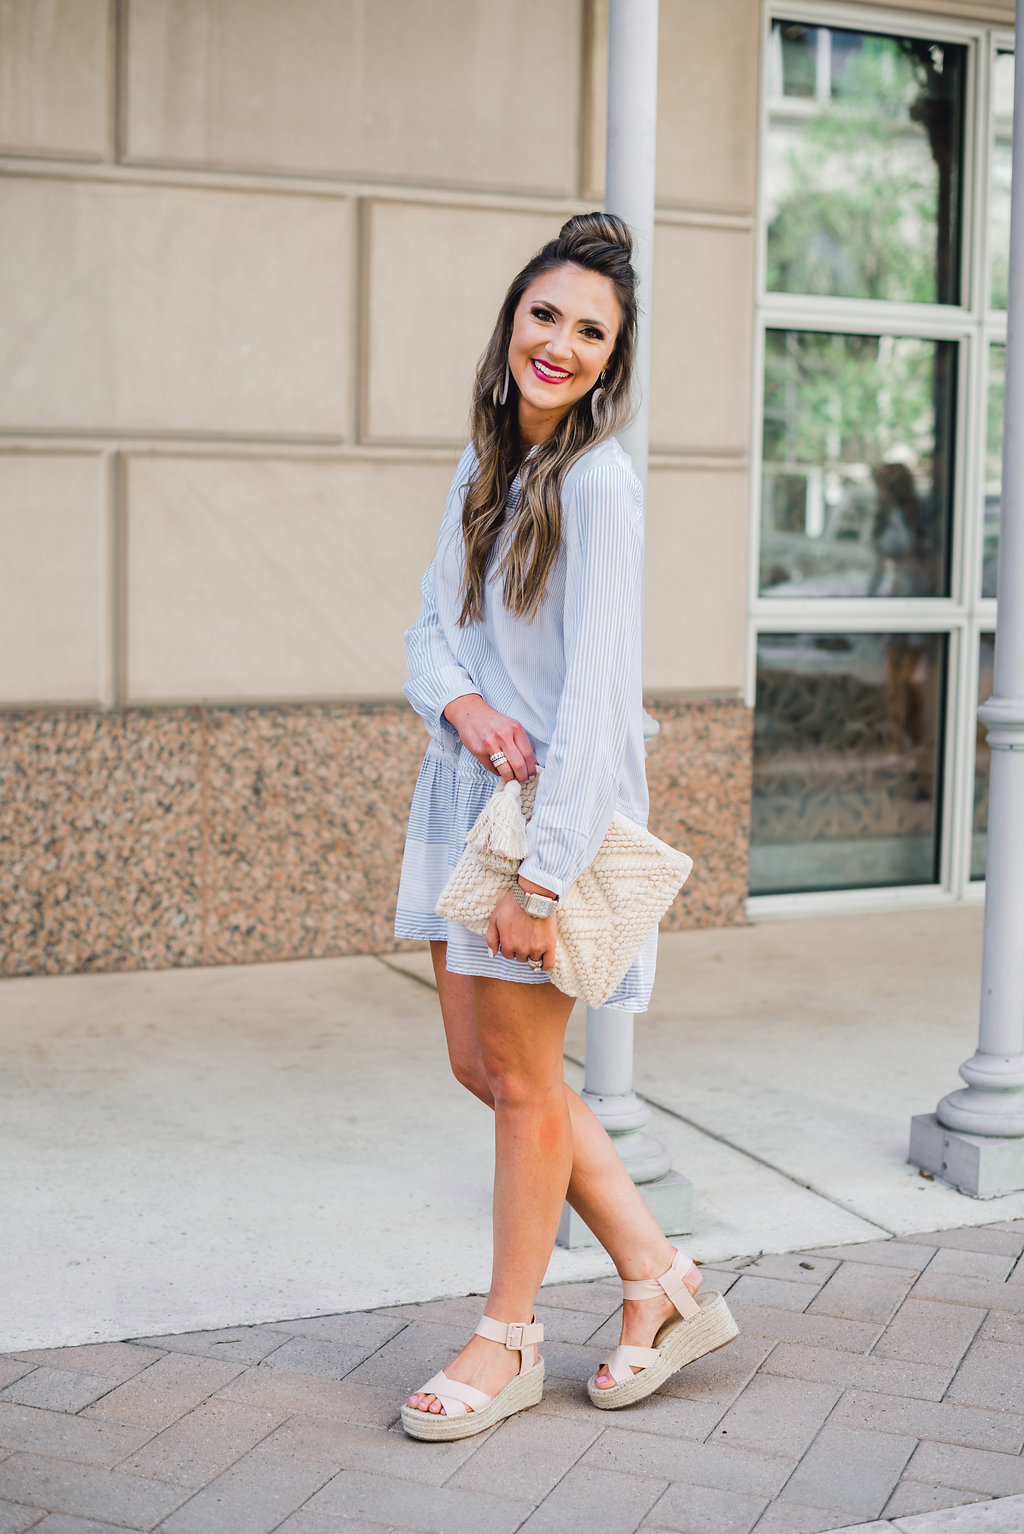 LOFT DRESS / how to wear one dress two ways - LOFT Dress styled two ways by popular Texas fashion blogger, Style Your Senses